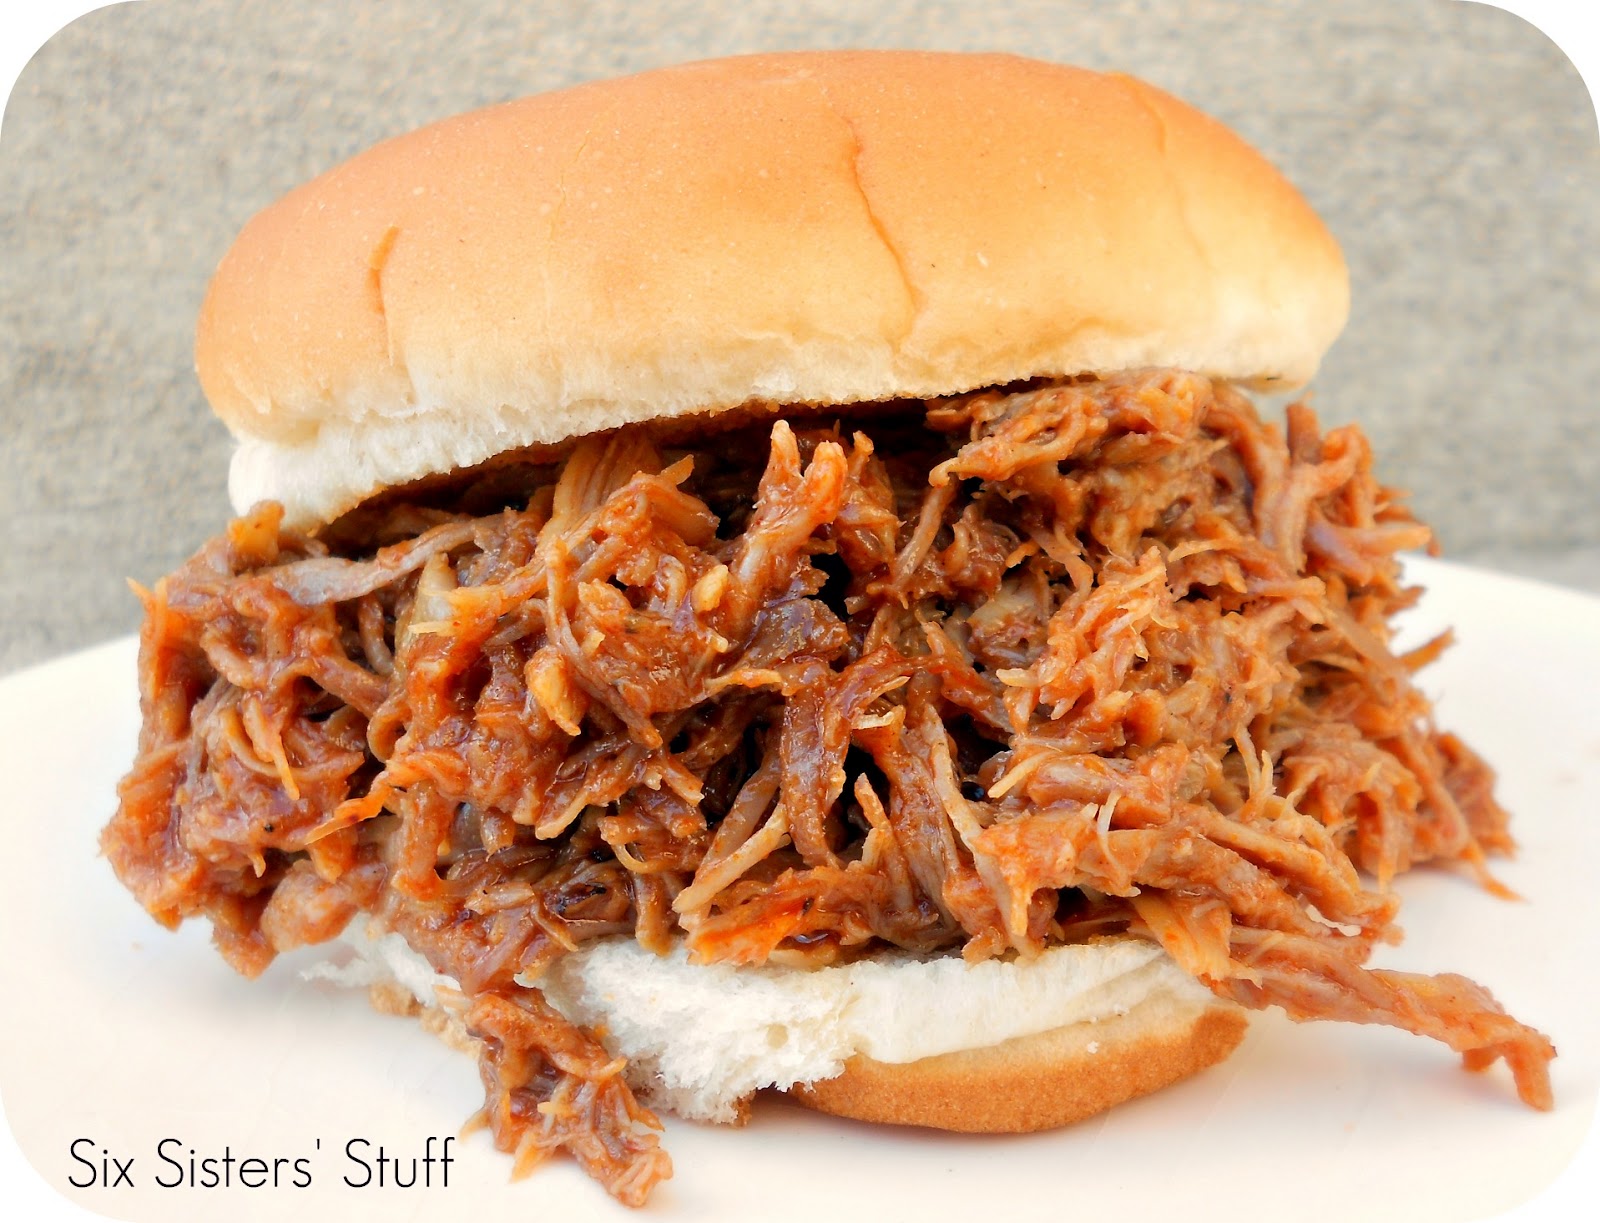 Sep 20, 2012. Learn how to make Southern style Jack Daniels BBQ pulled pork.. Also, the  pork needs to cook on low in the slow cooker for 10 of those hours, so plan your  time well.. for the cole slaw, the pulled pork and the Jack Daniels BBQ sauce..  Just use what you have – it will come out amazing no matter what.